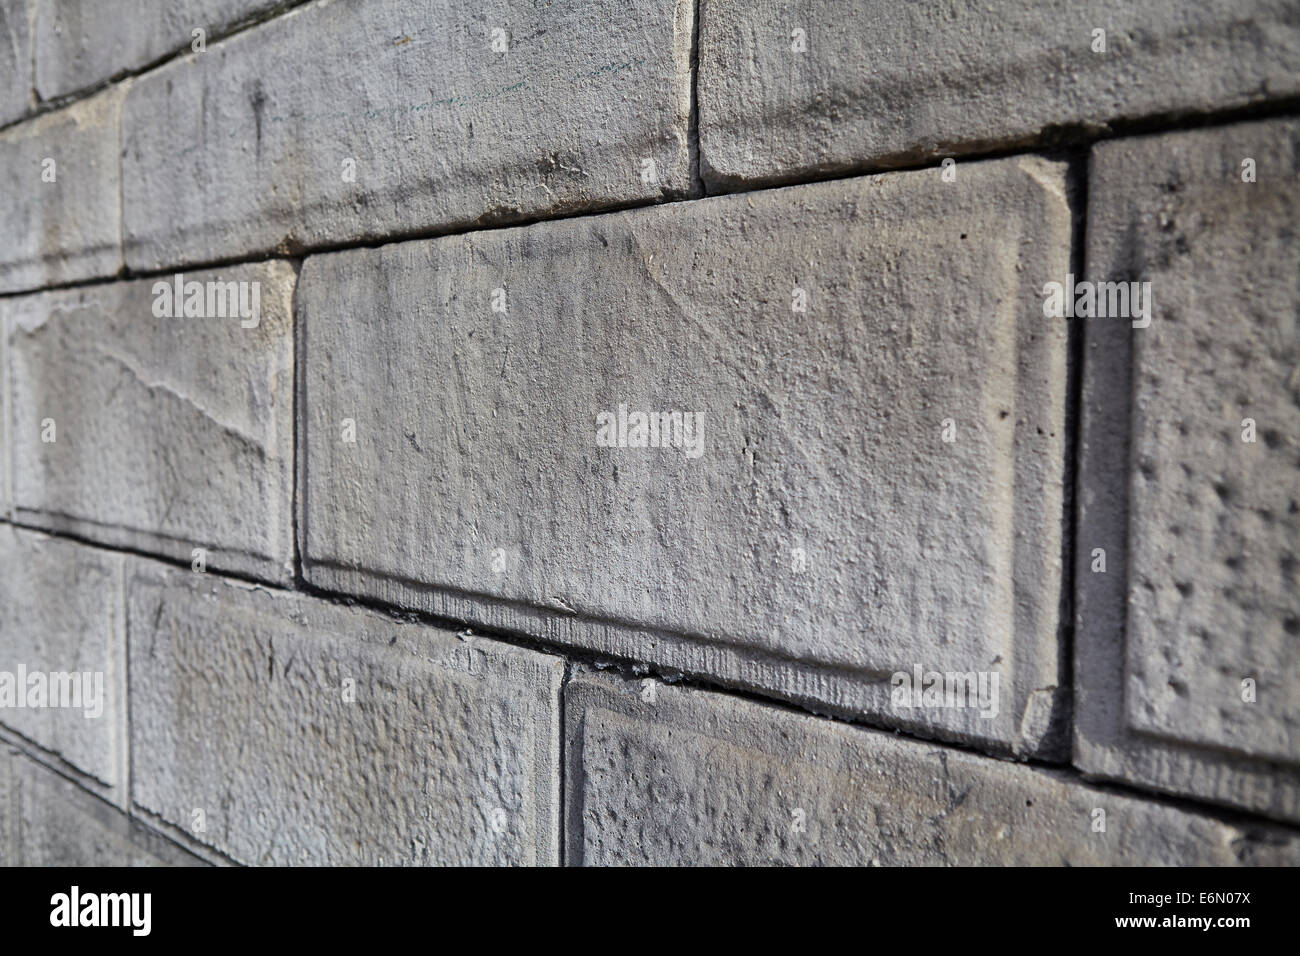 London textures, typical grey stone wall. Stock Photo